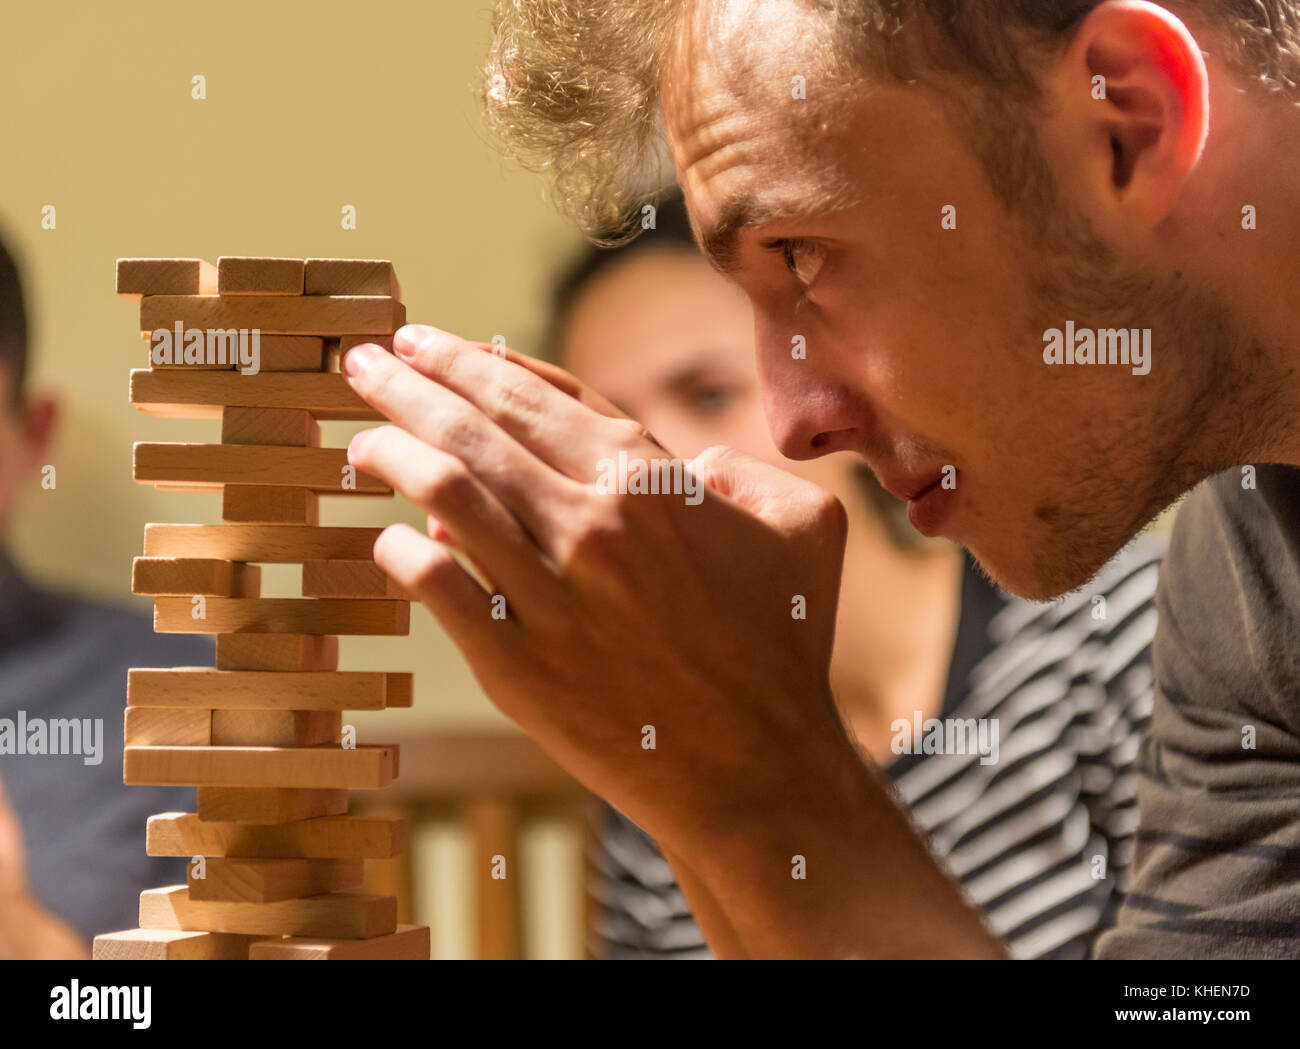 Young man plays Jenga, stacking a tower with wooden blocks, concentrated Stock Photo